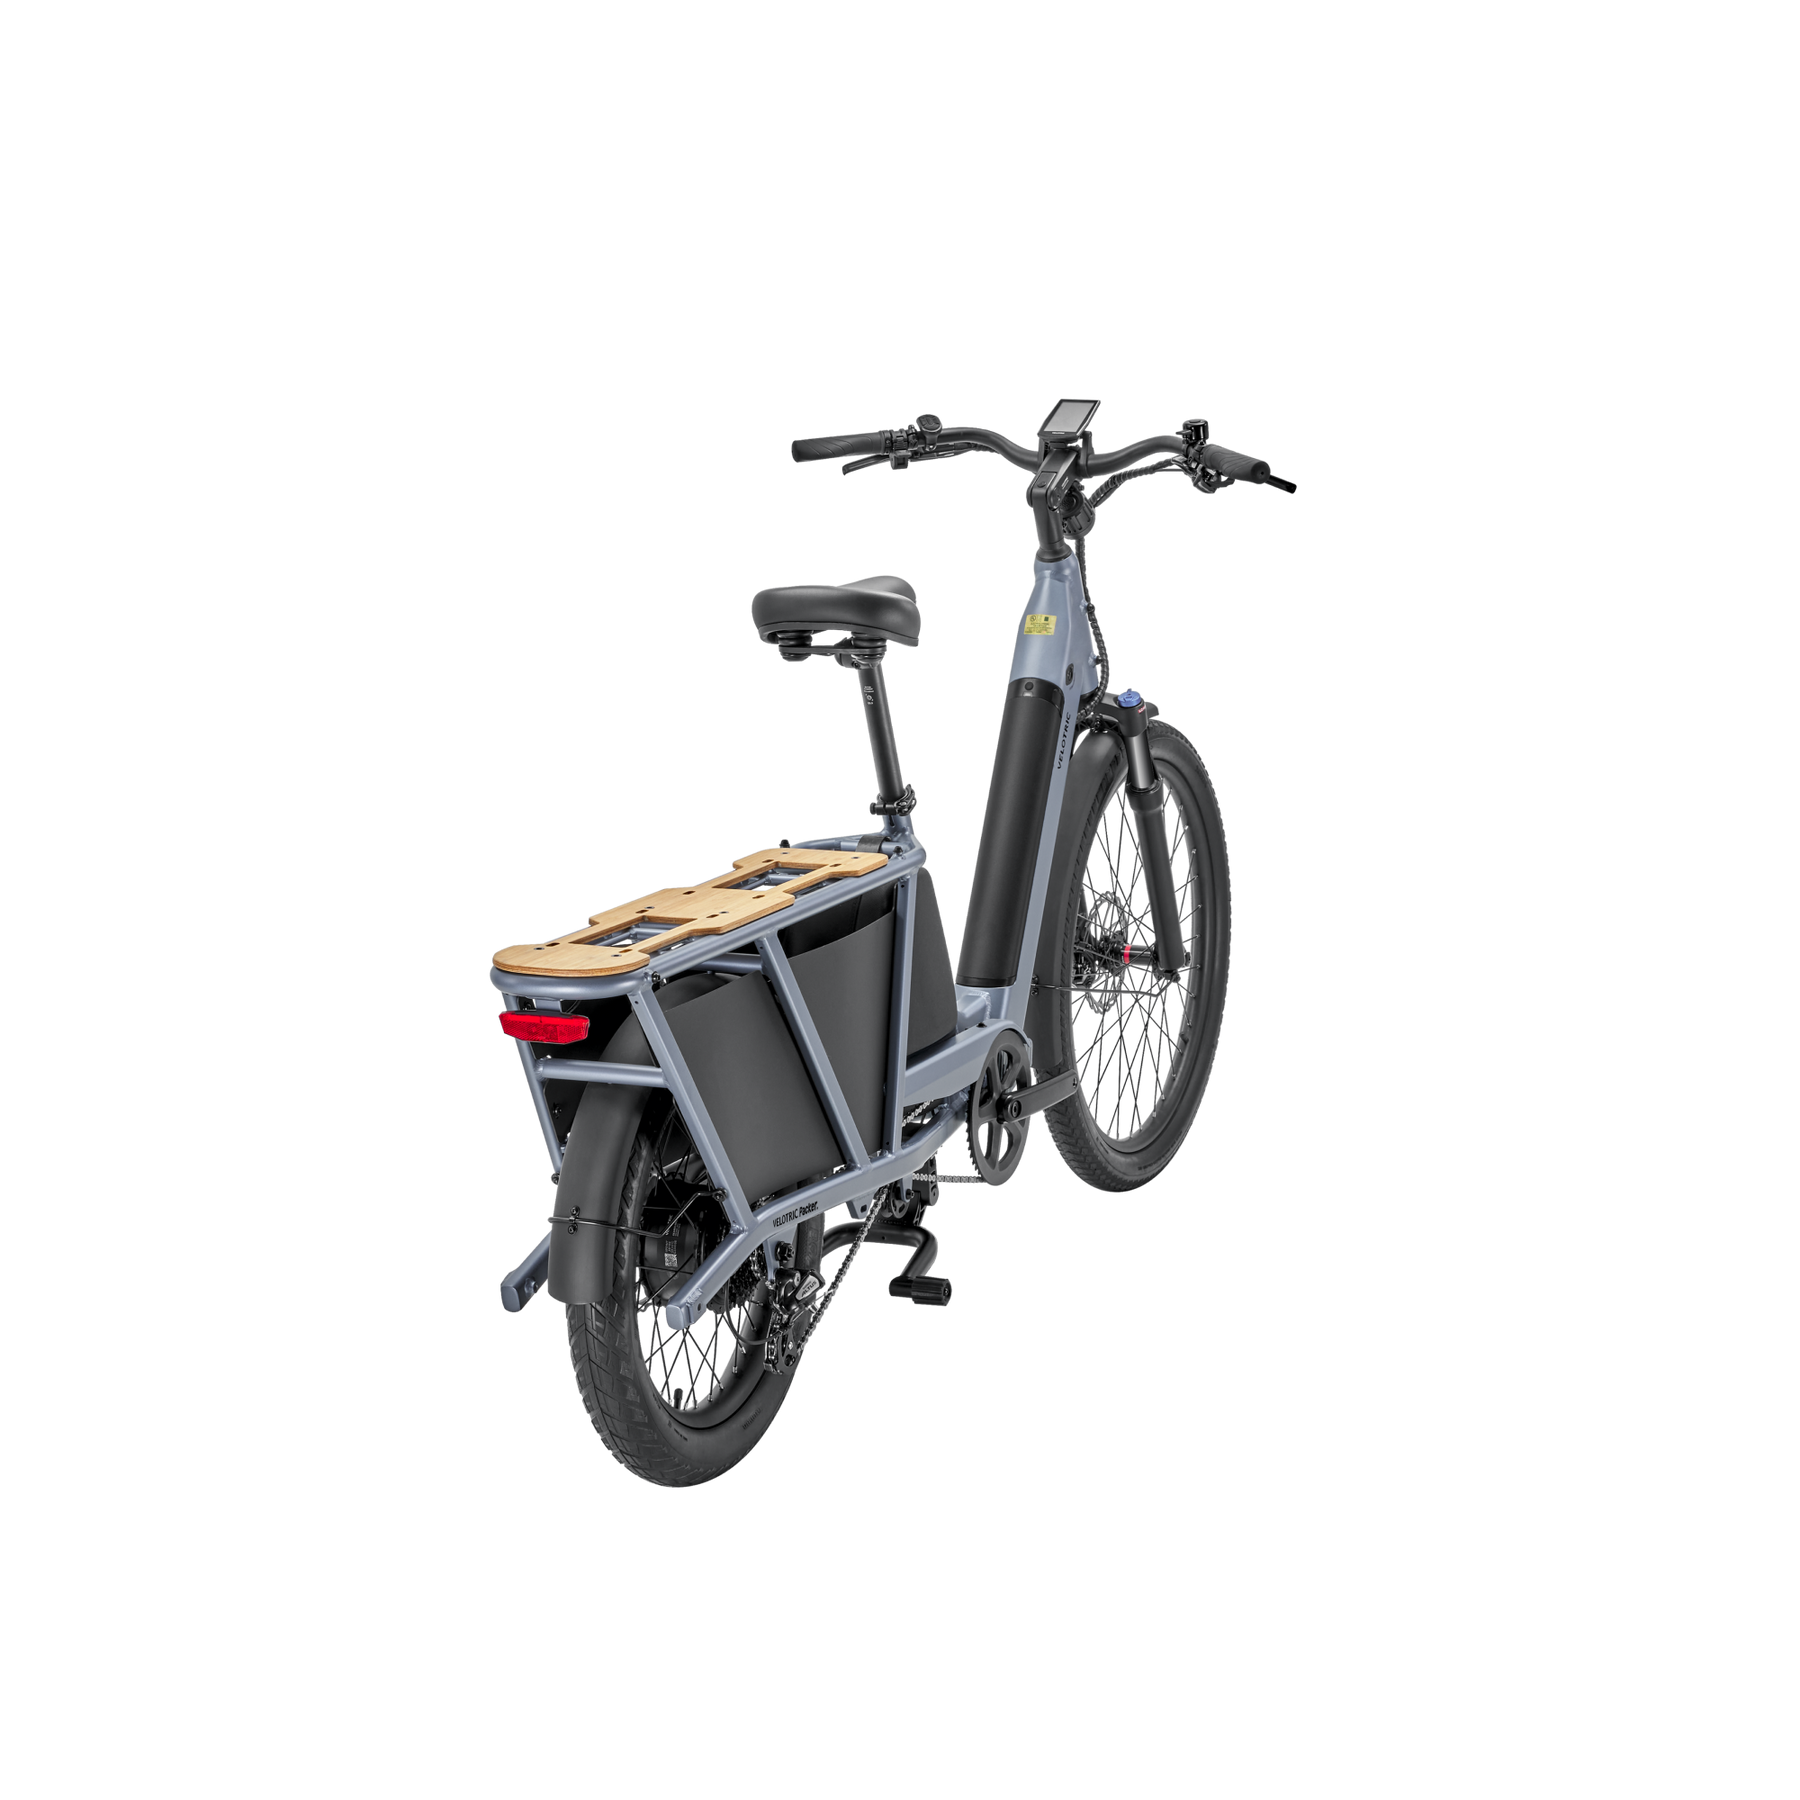 A Velotric - Packer 1 - Indigo Grey electric bike with a wooden box on the back.